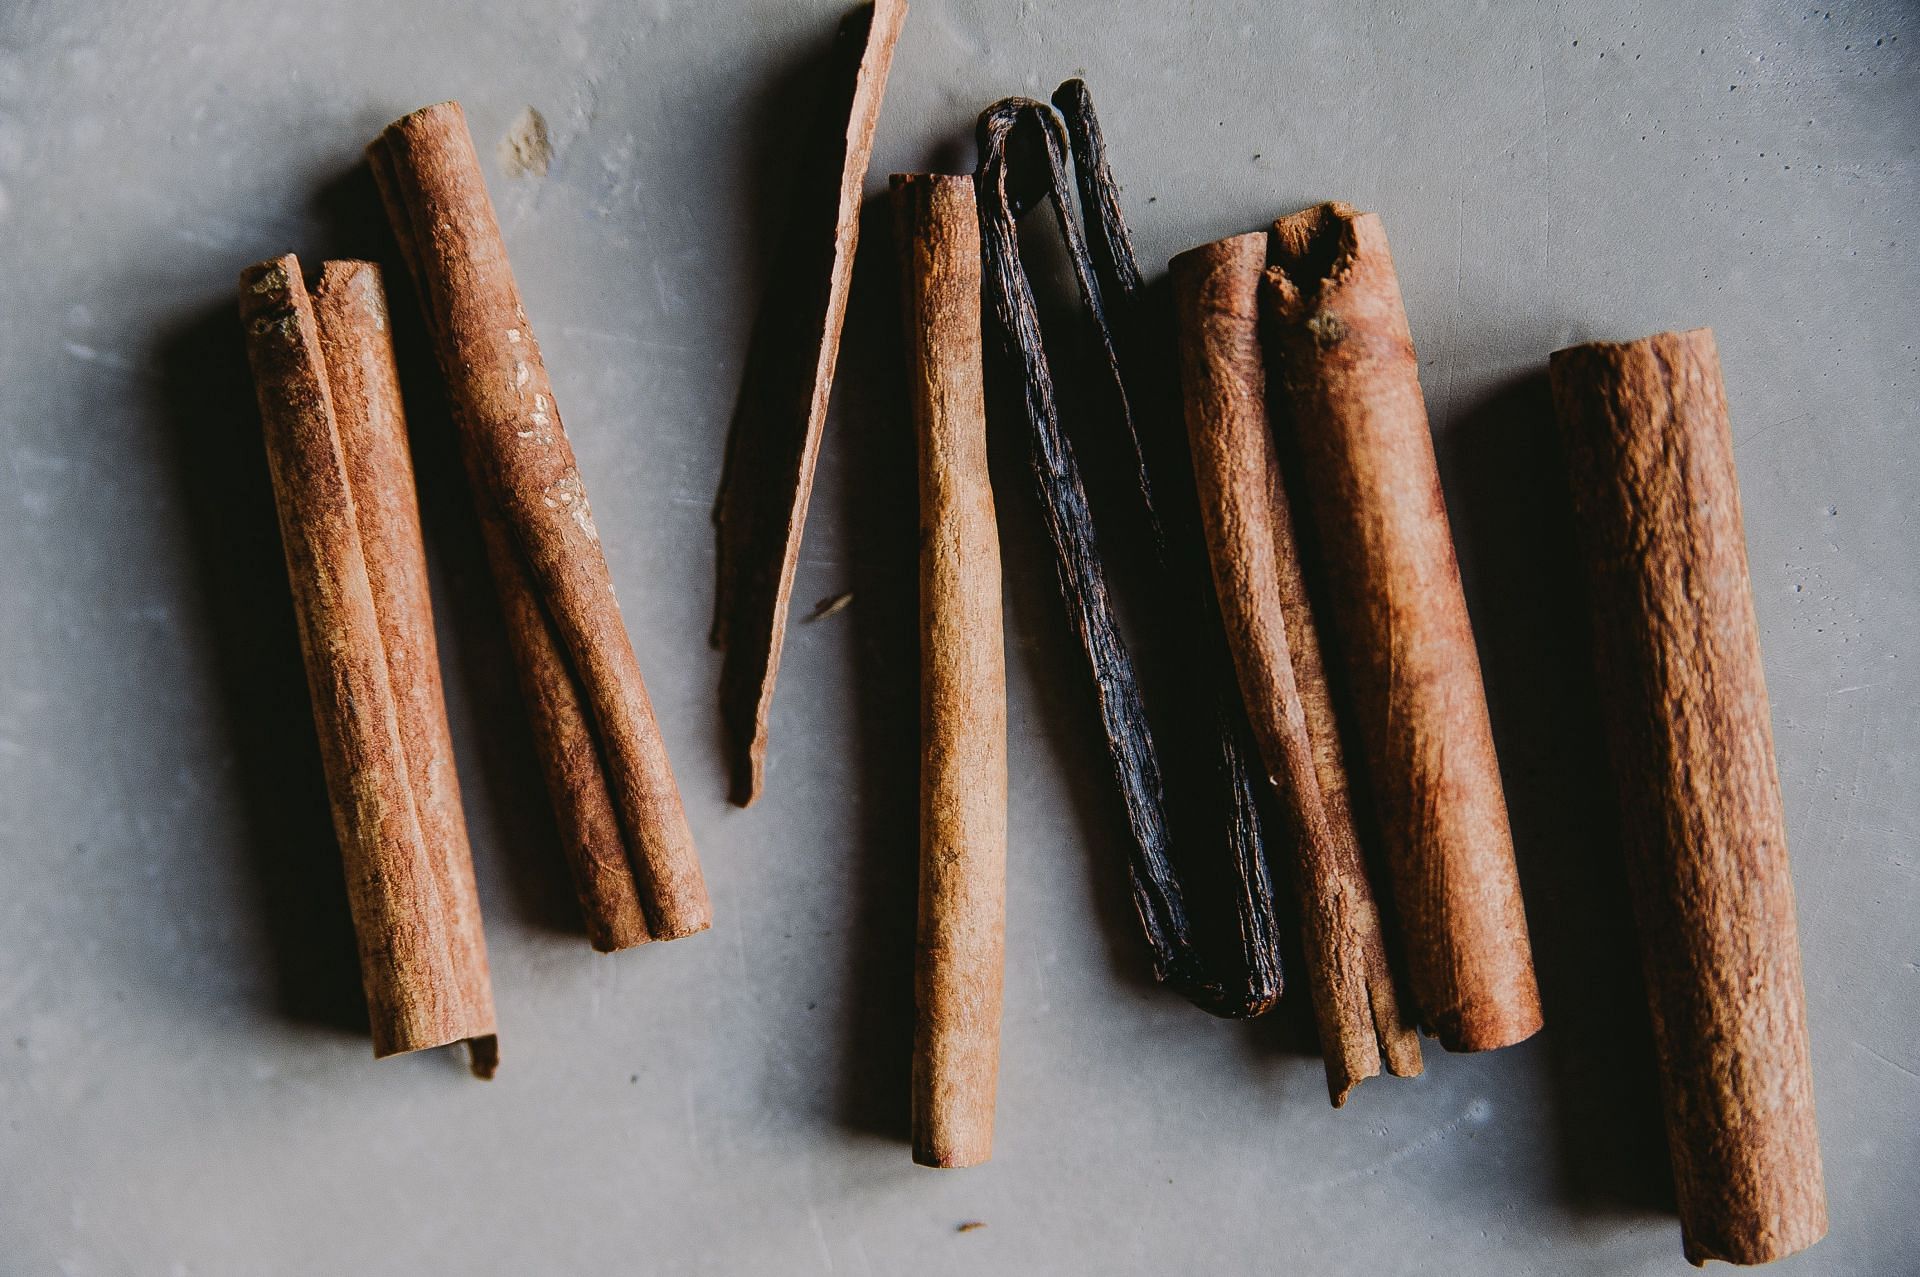 Cinnamon helps relieve nausea during menstruation. Brew it into your tea to keep feelings of sickness at bay (Image via Pexels @Daria Shevtsova)